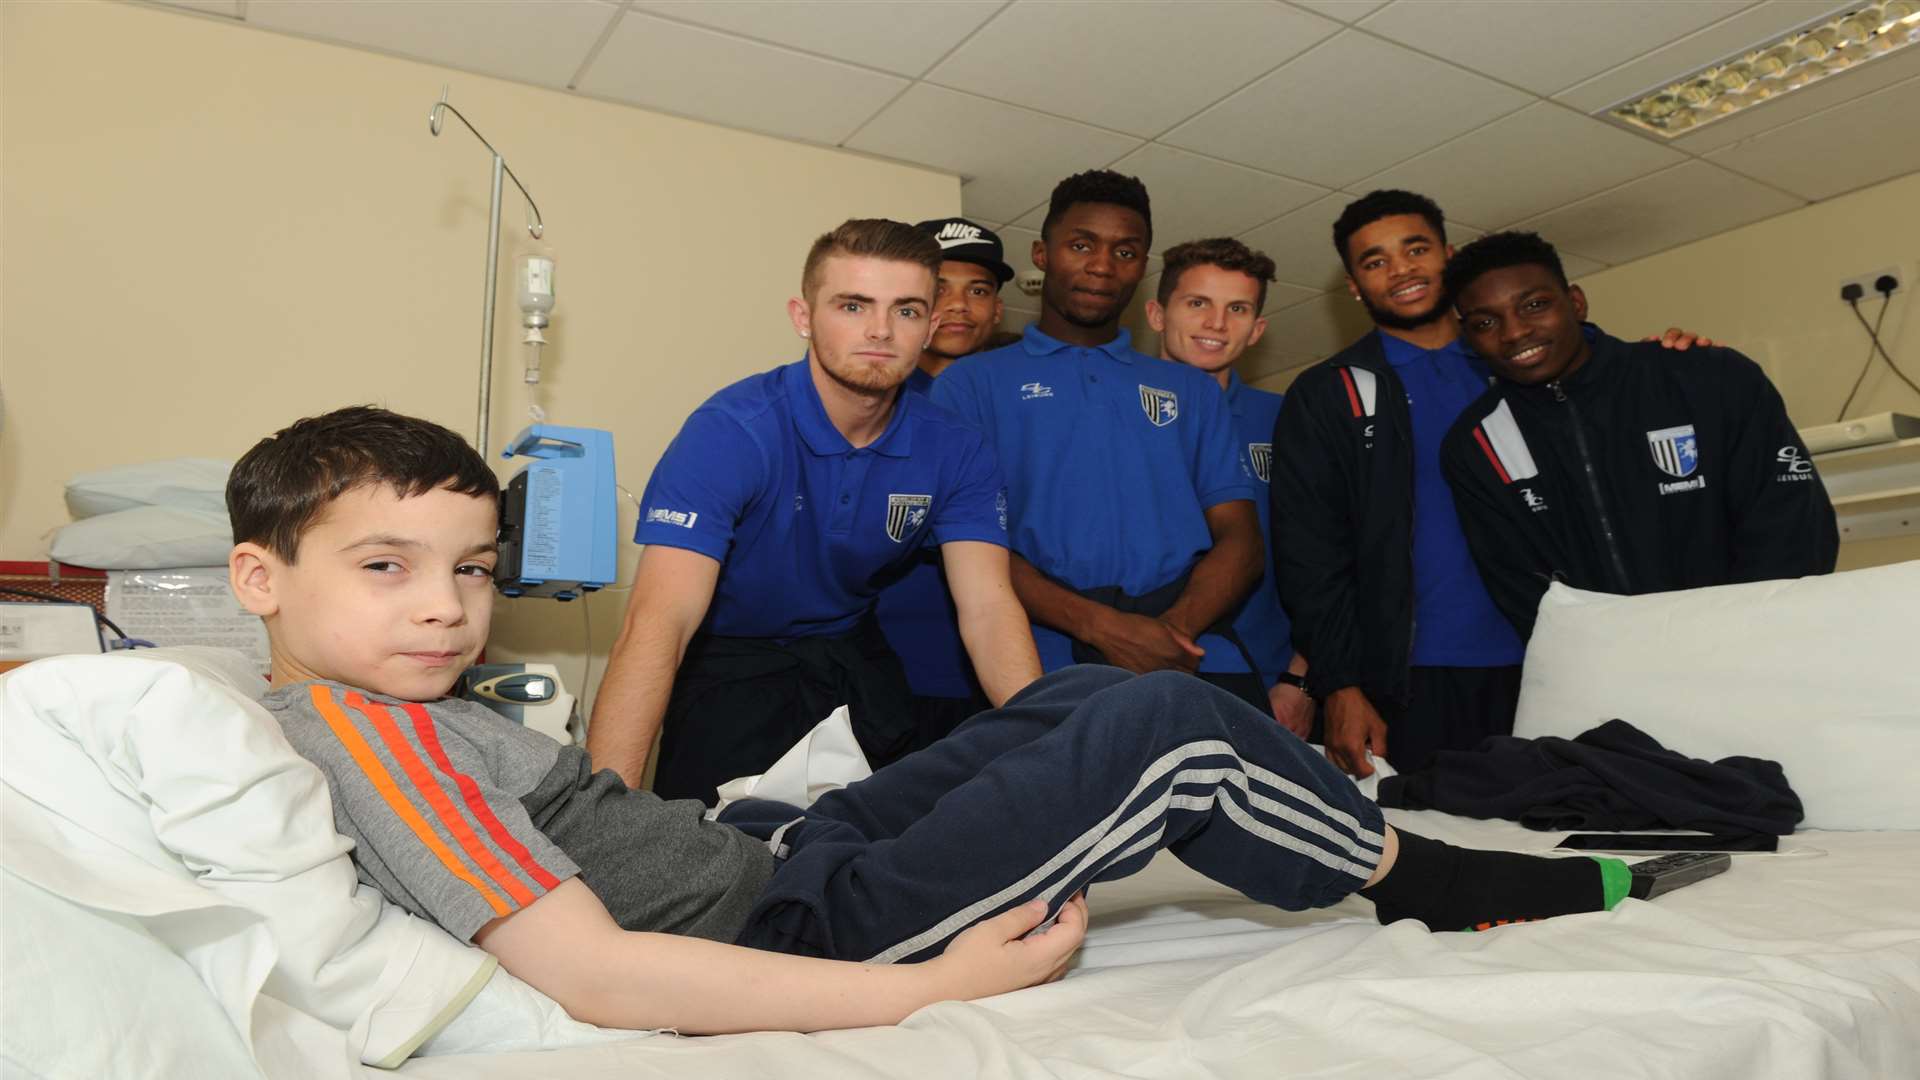 Lewis Coates, 10, is pictured with Gills players